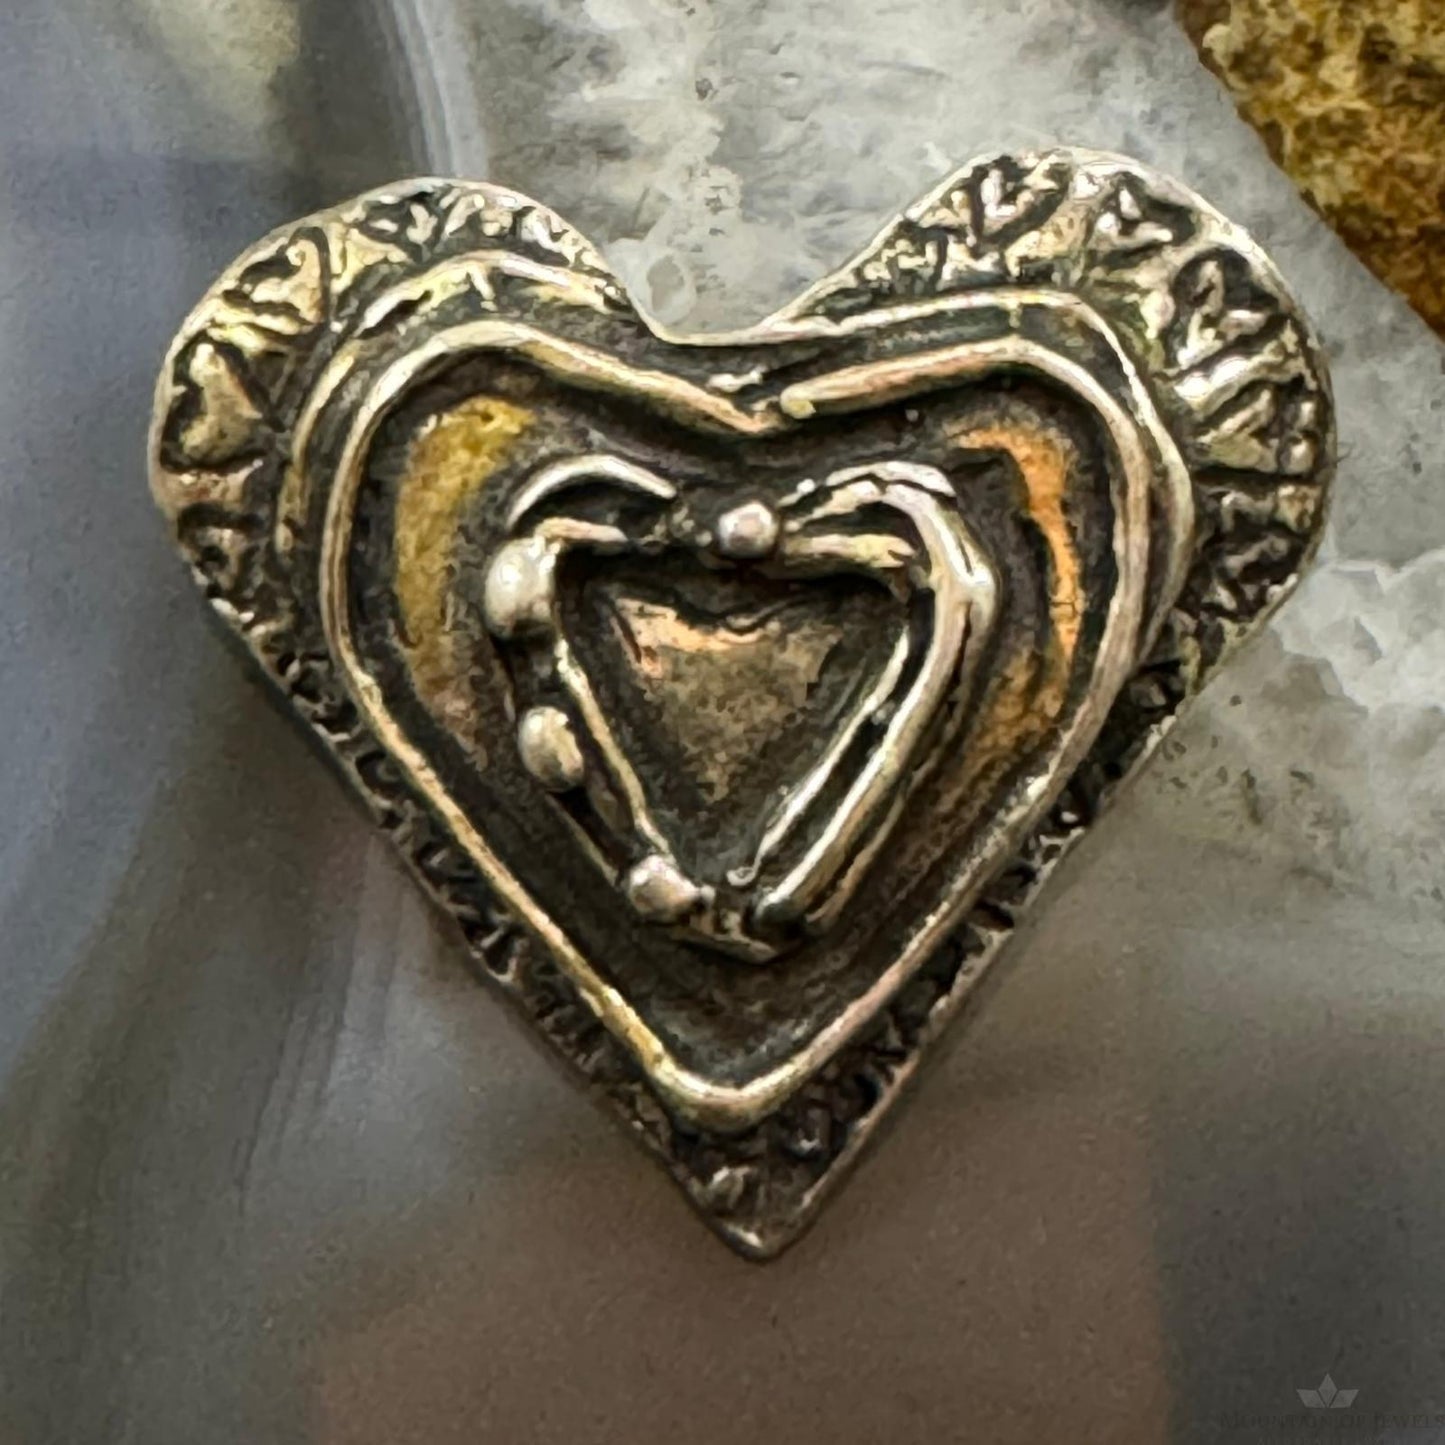 Vintage Silver Decorated Heart Fashion Brooch For Women